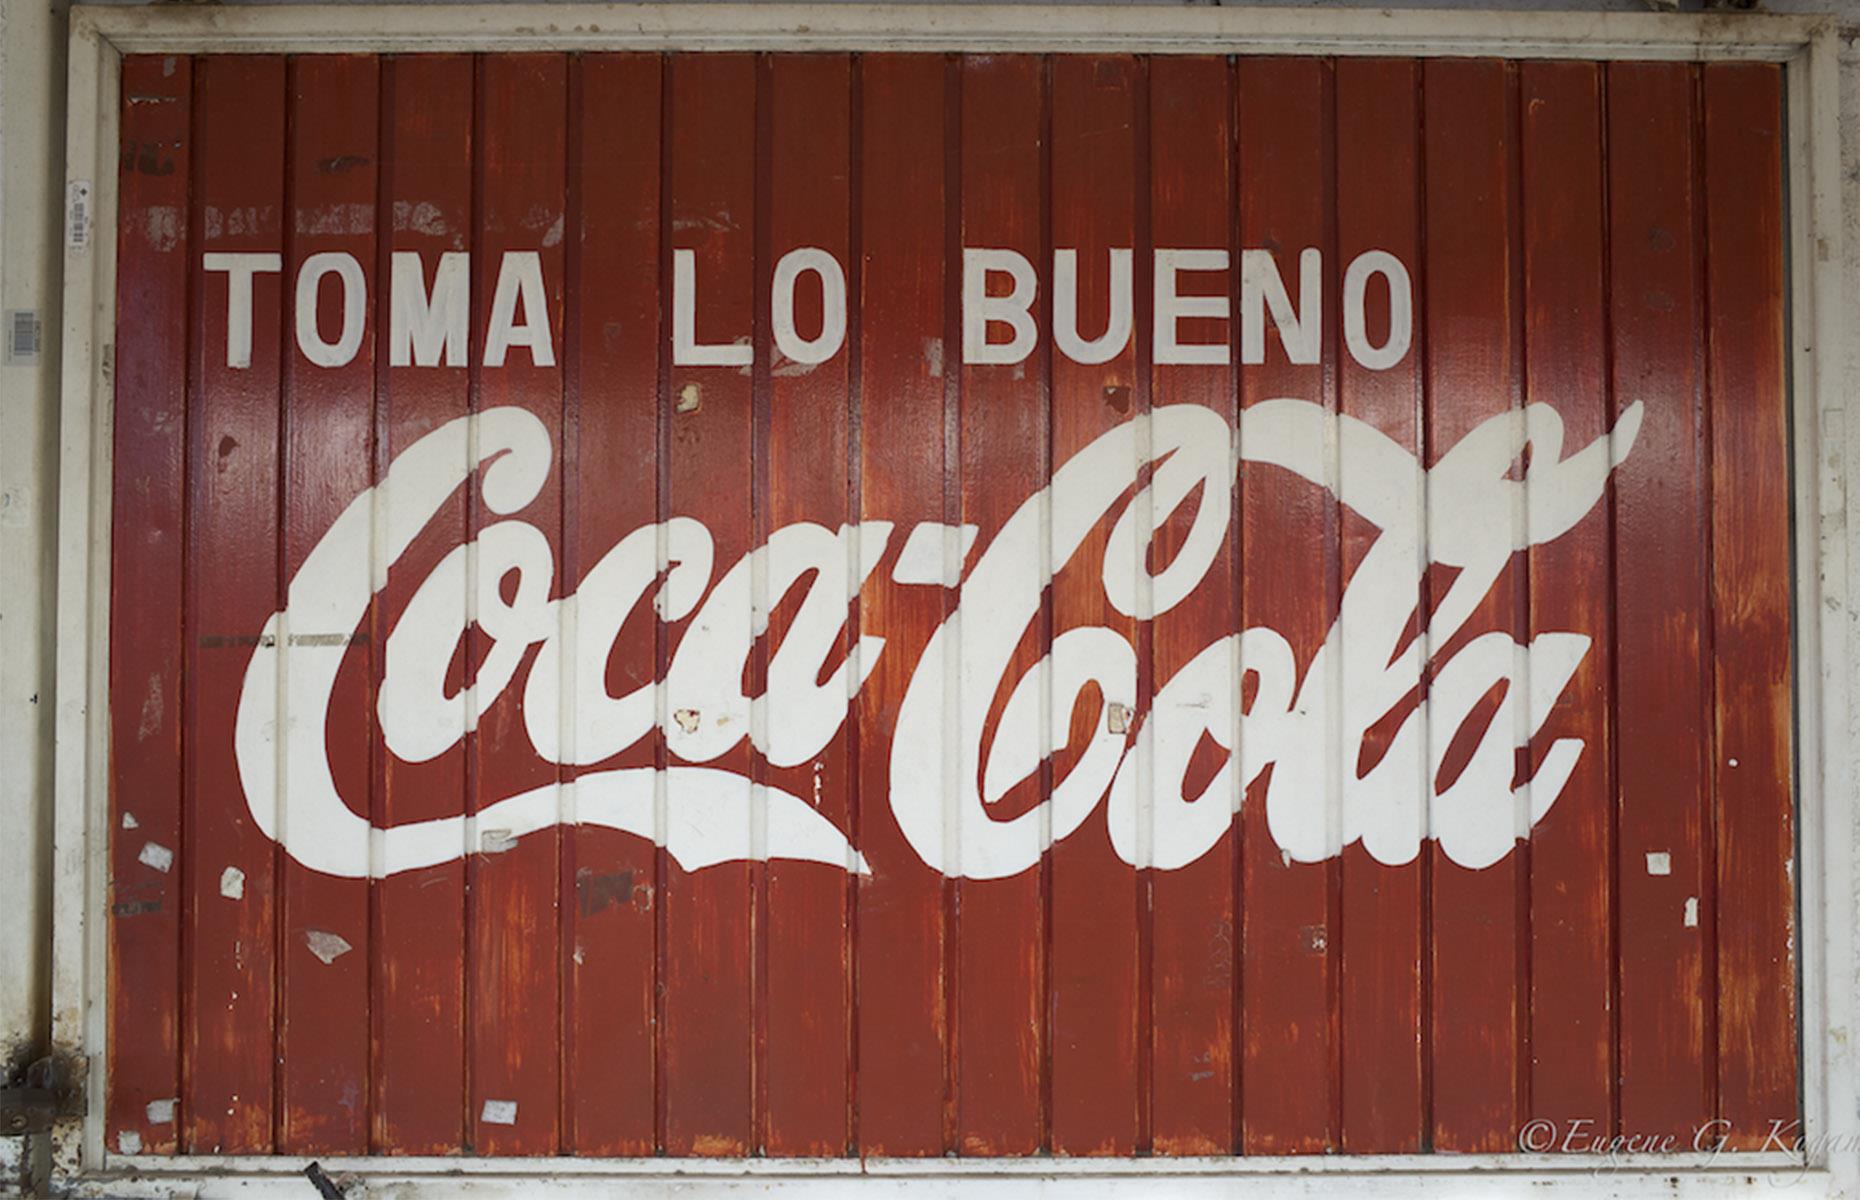 <p>Coca-Cola’s largest fan base is in Mexico, where the average person drinks more than 700 servings per year – that’s nearly double what Americans drink. Its popularity began around the same time that Coca-Cola sponsored the Mexico City Olympics and World Cup in the early 1970s.</p>  <p><strong><a href="https://www.lovefood.com/gallerylist/82980/the-worlds-strangest-crisp-flavours">Take a look at the world's strangest crisp flavors</a></strong></p>